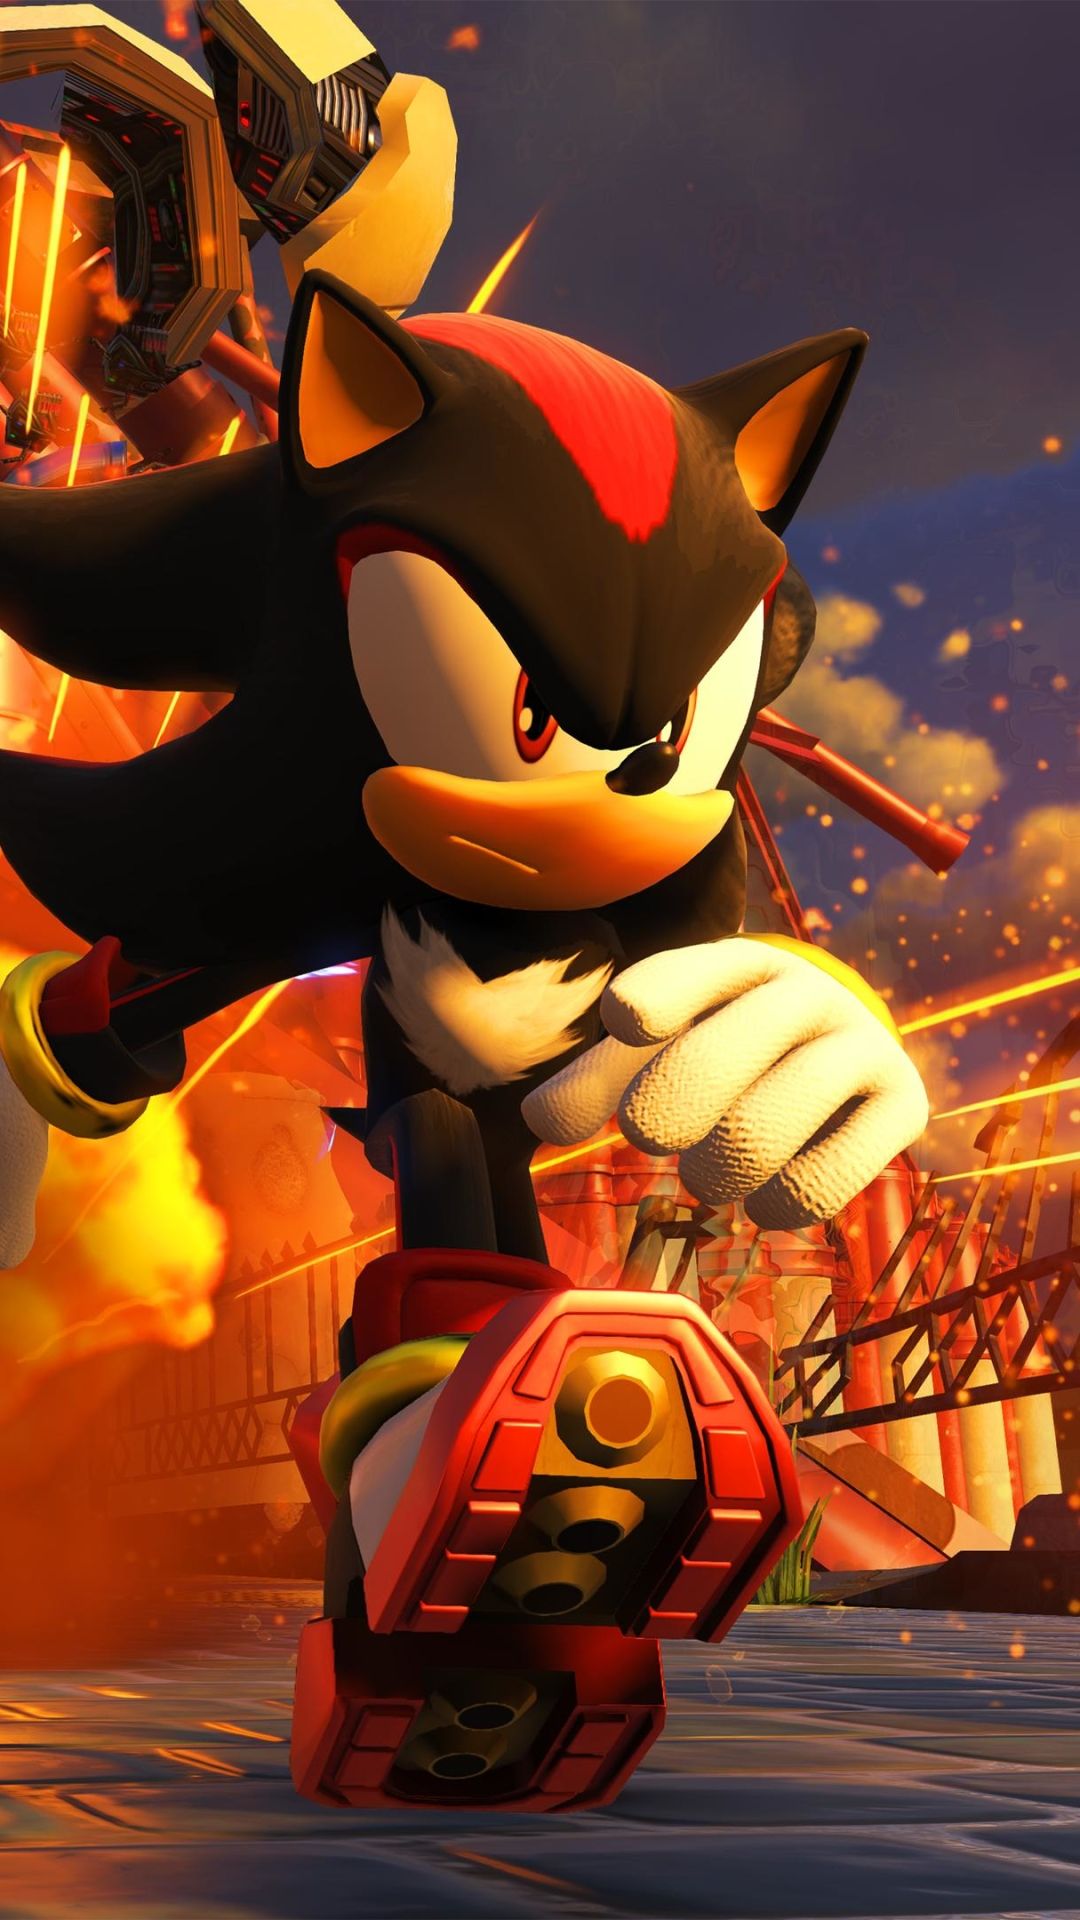 Mobile wallpaper: Video Game, Infinite (Sonic The Hedgehog), Sonic Forces, Sonic, 1177943 download the picture for free